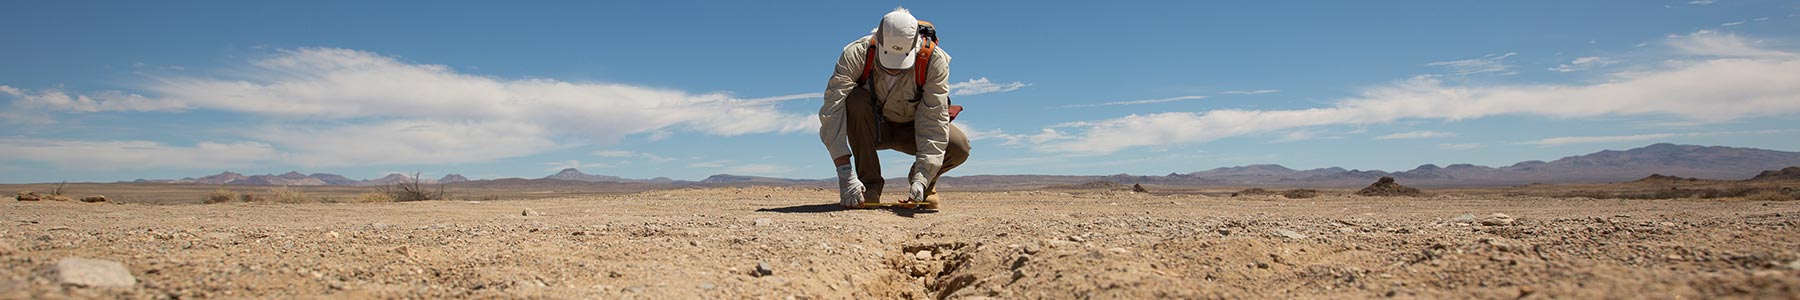 Sinan Akçiz measures a surface ruptire from the Ridgecrest earthquakes